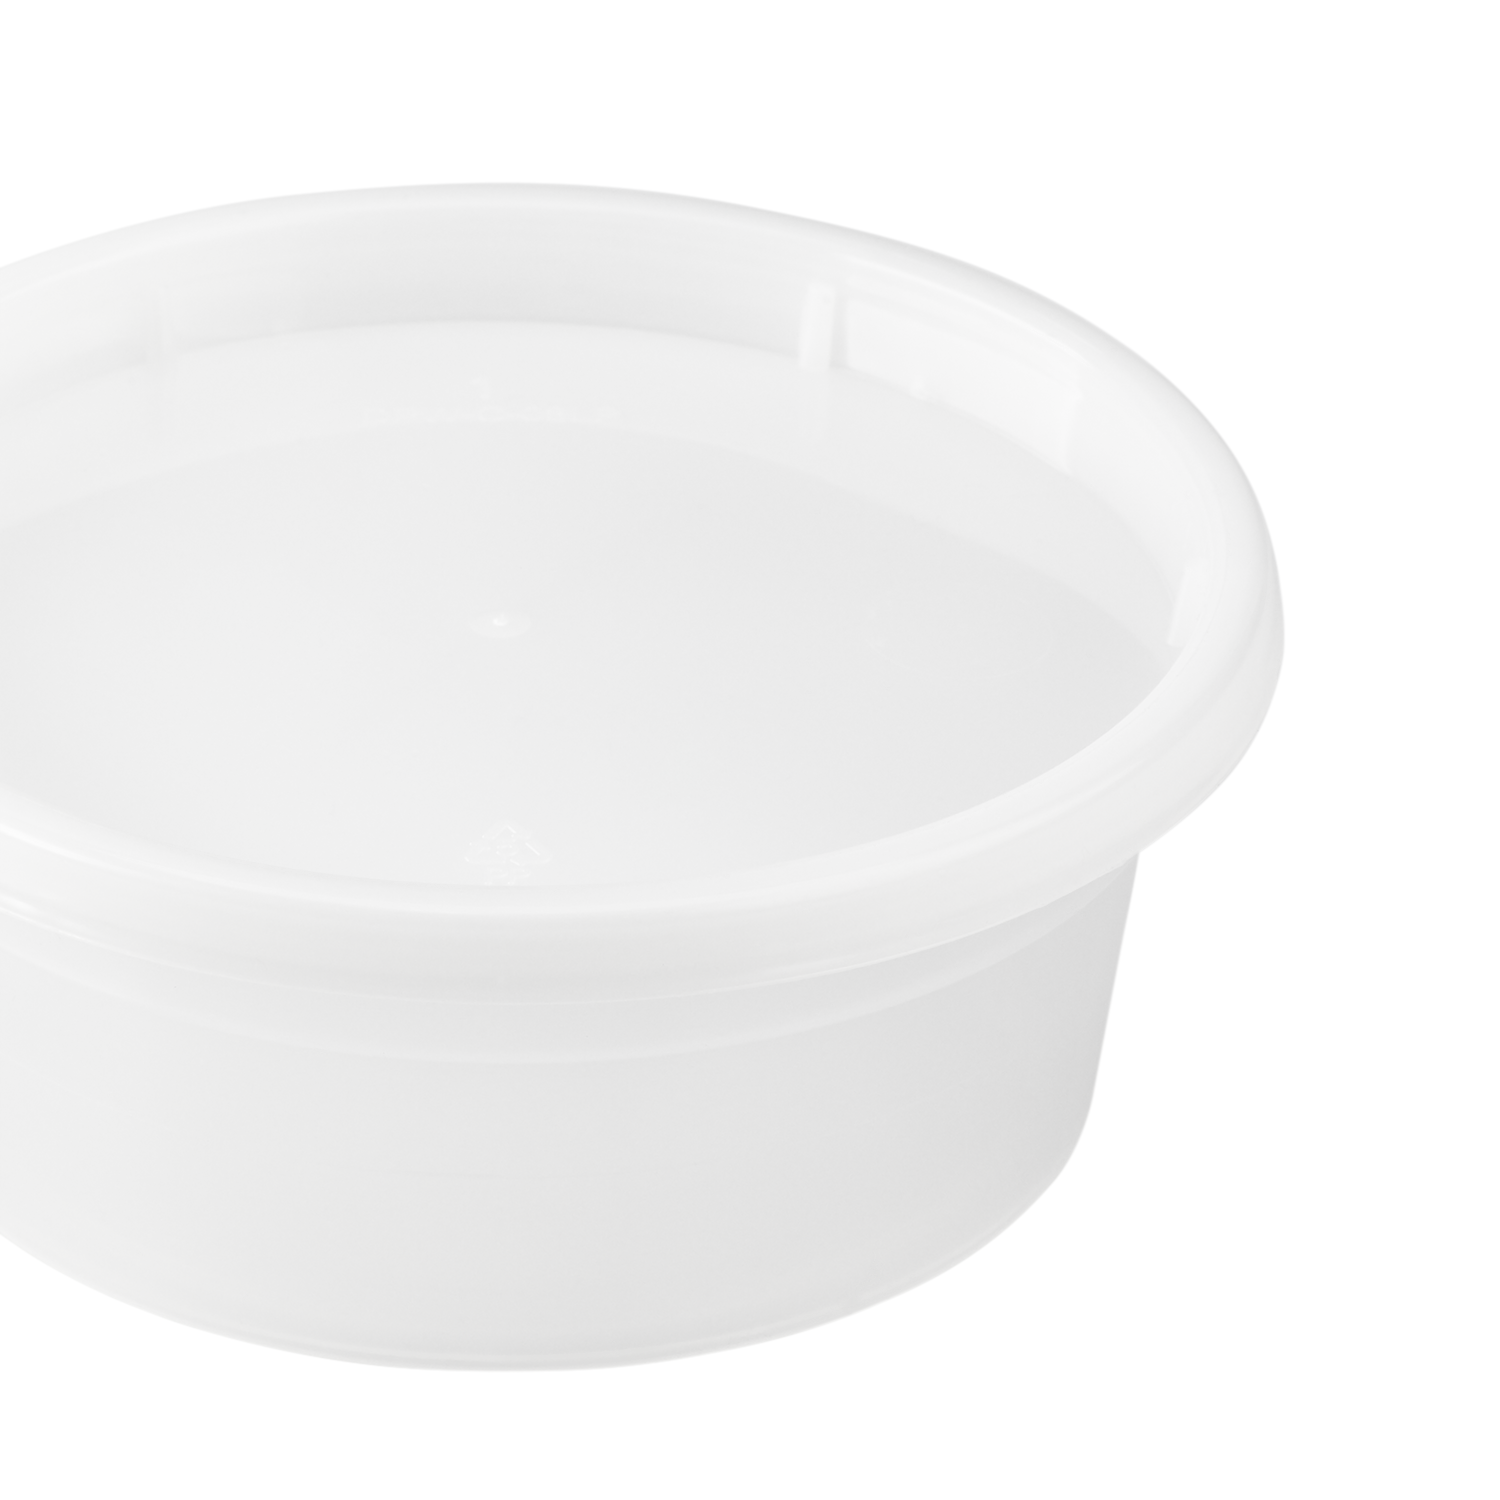 8 oz. Clear Deli Containers and Lids, Case of 240 – CiboWares